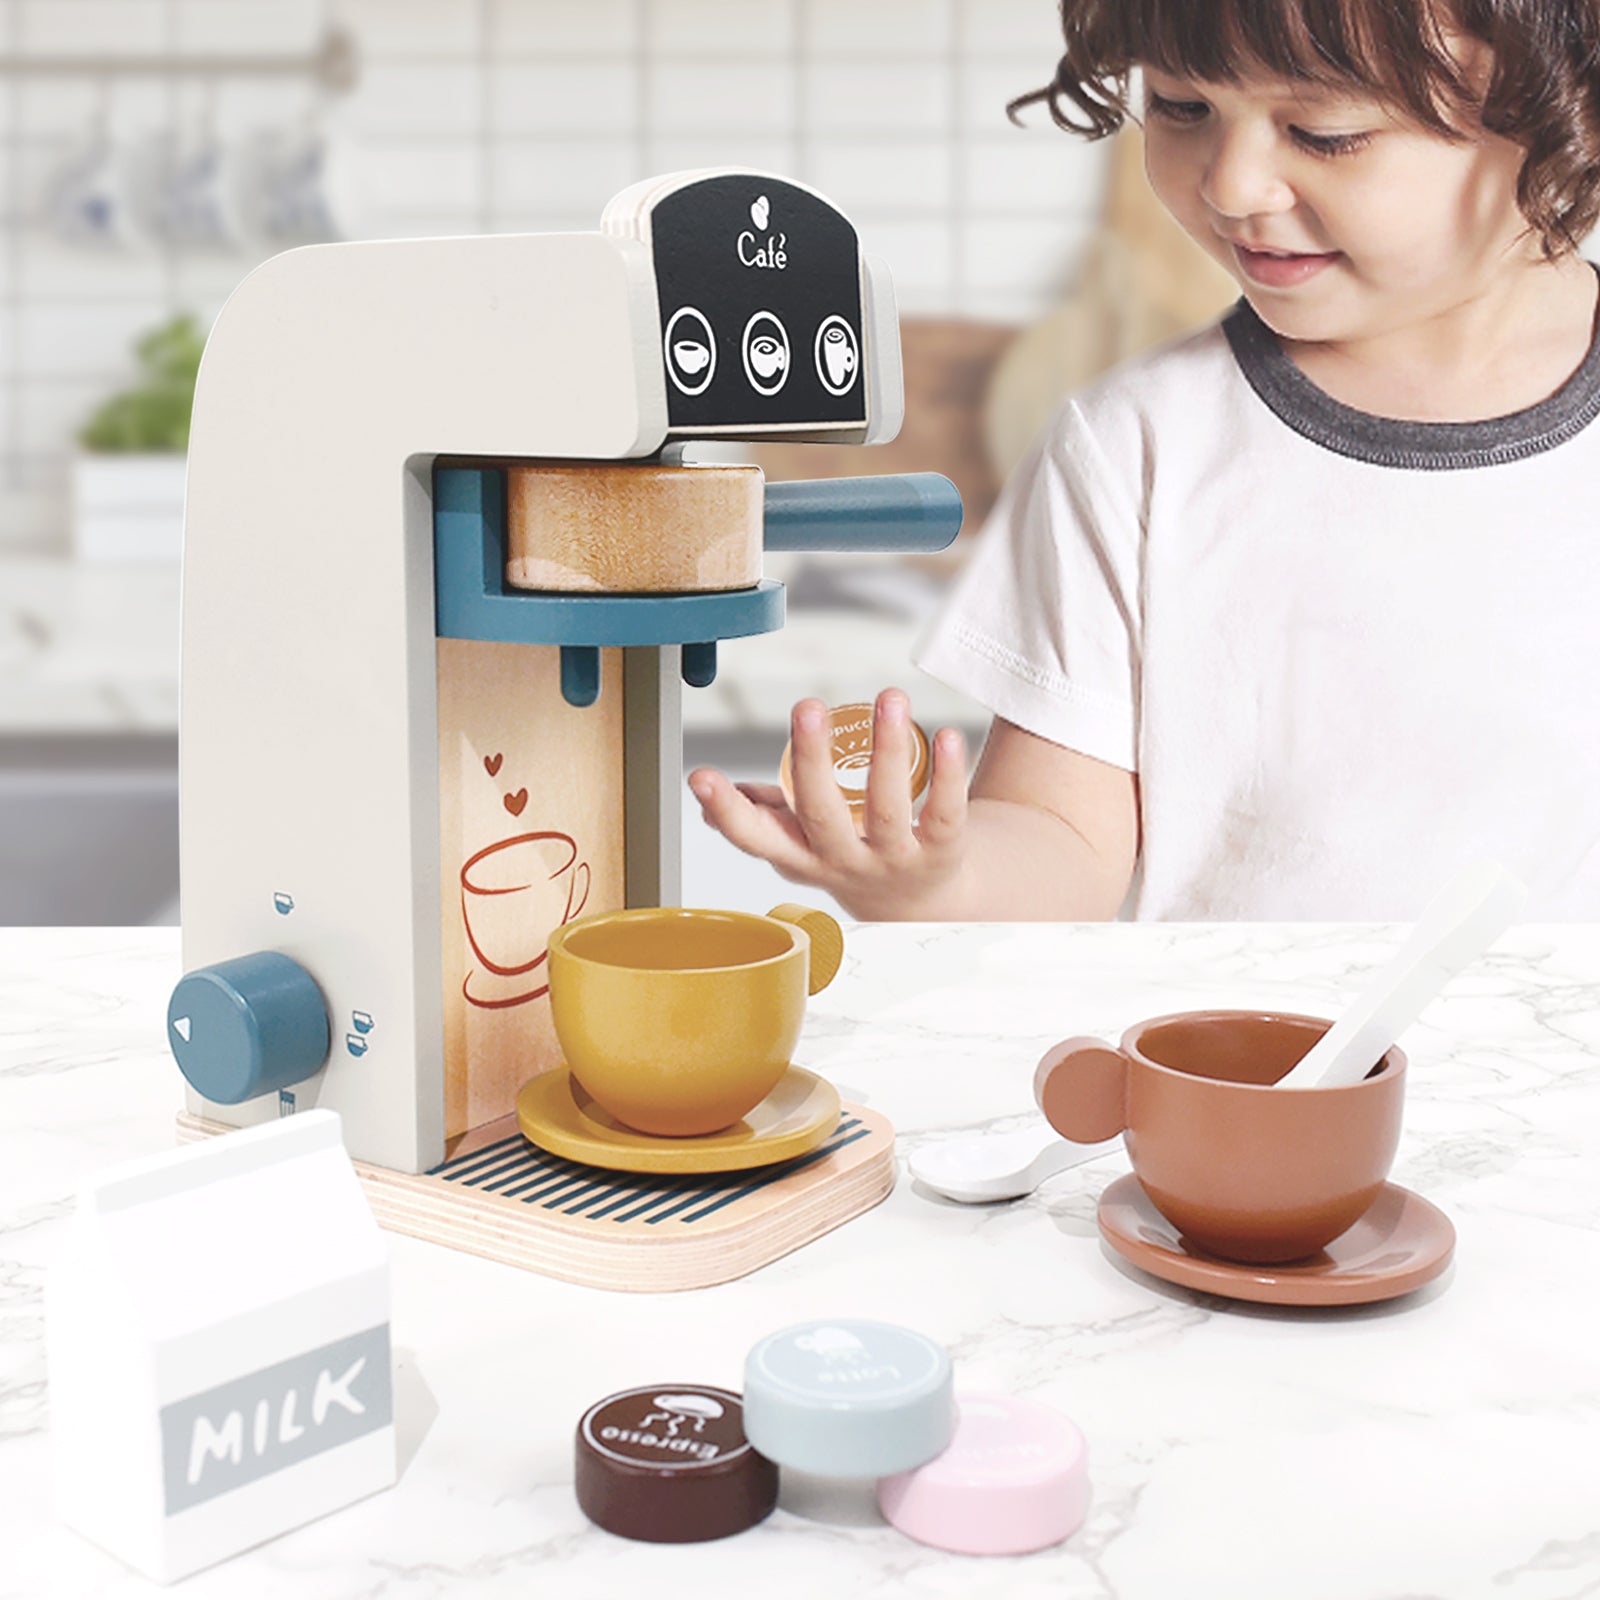 PairPear Coffee Maker Espresso Playset - Wooden Deluxe Play Kitchen Set  with Accessories 13 Pieces Multicolor 